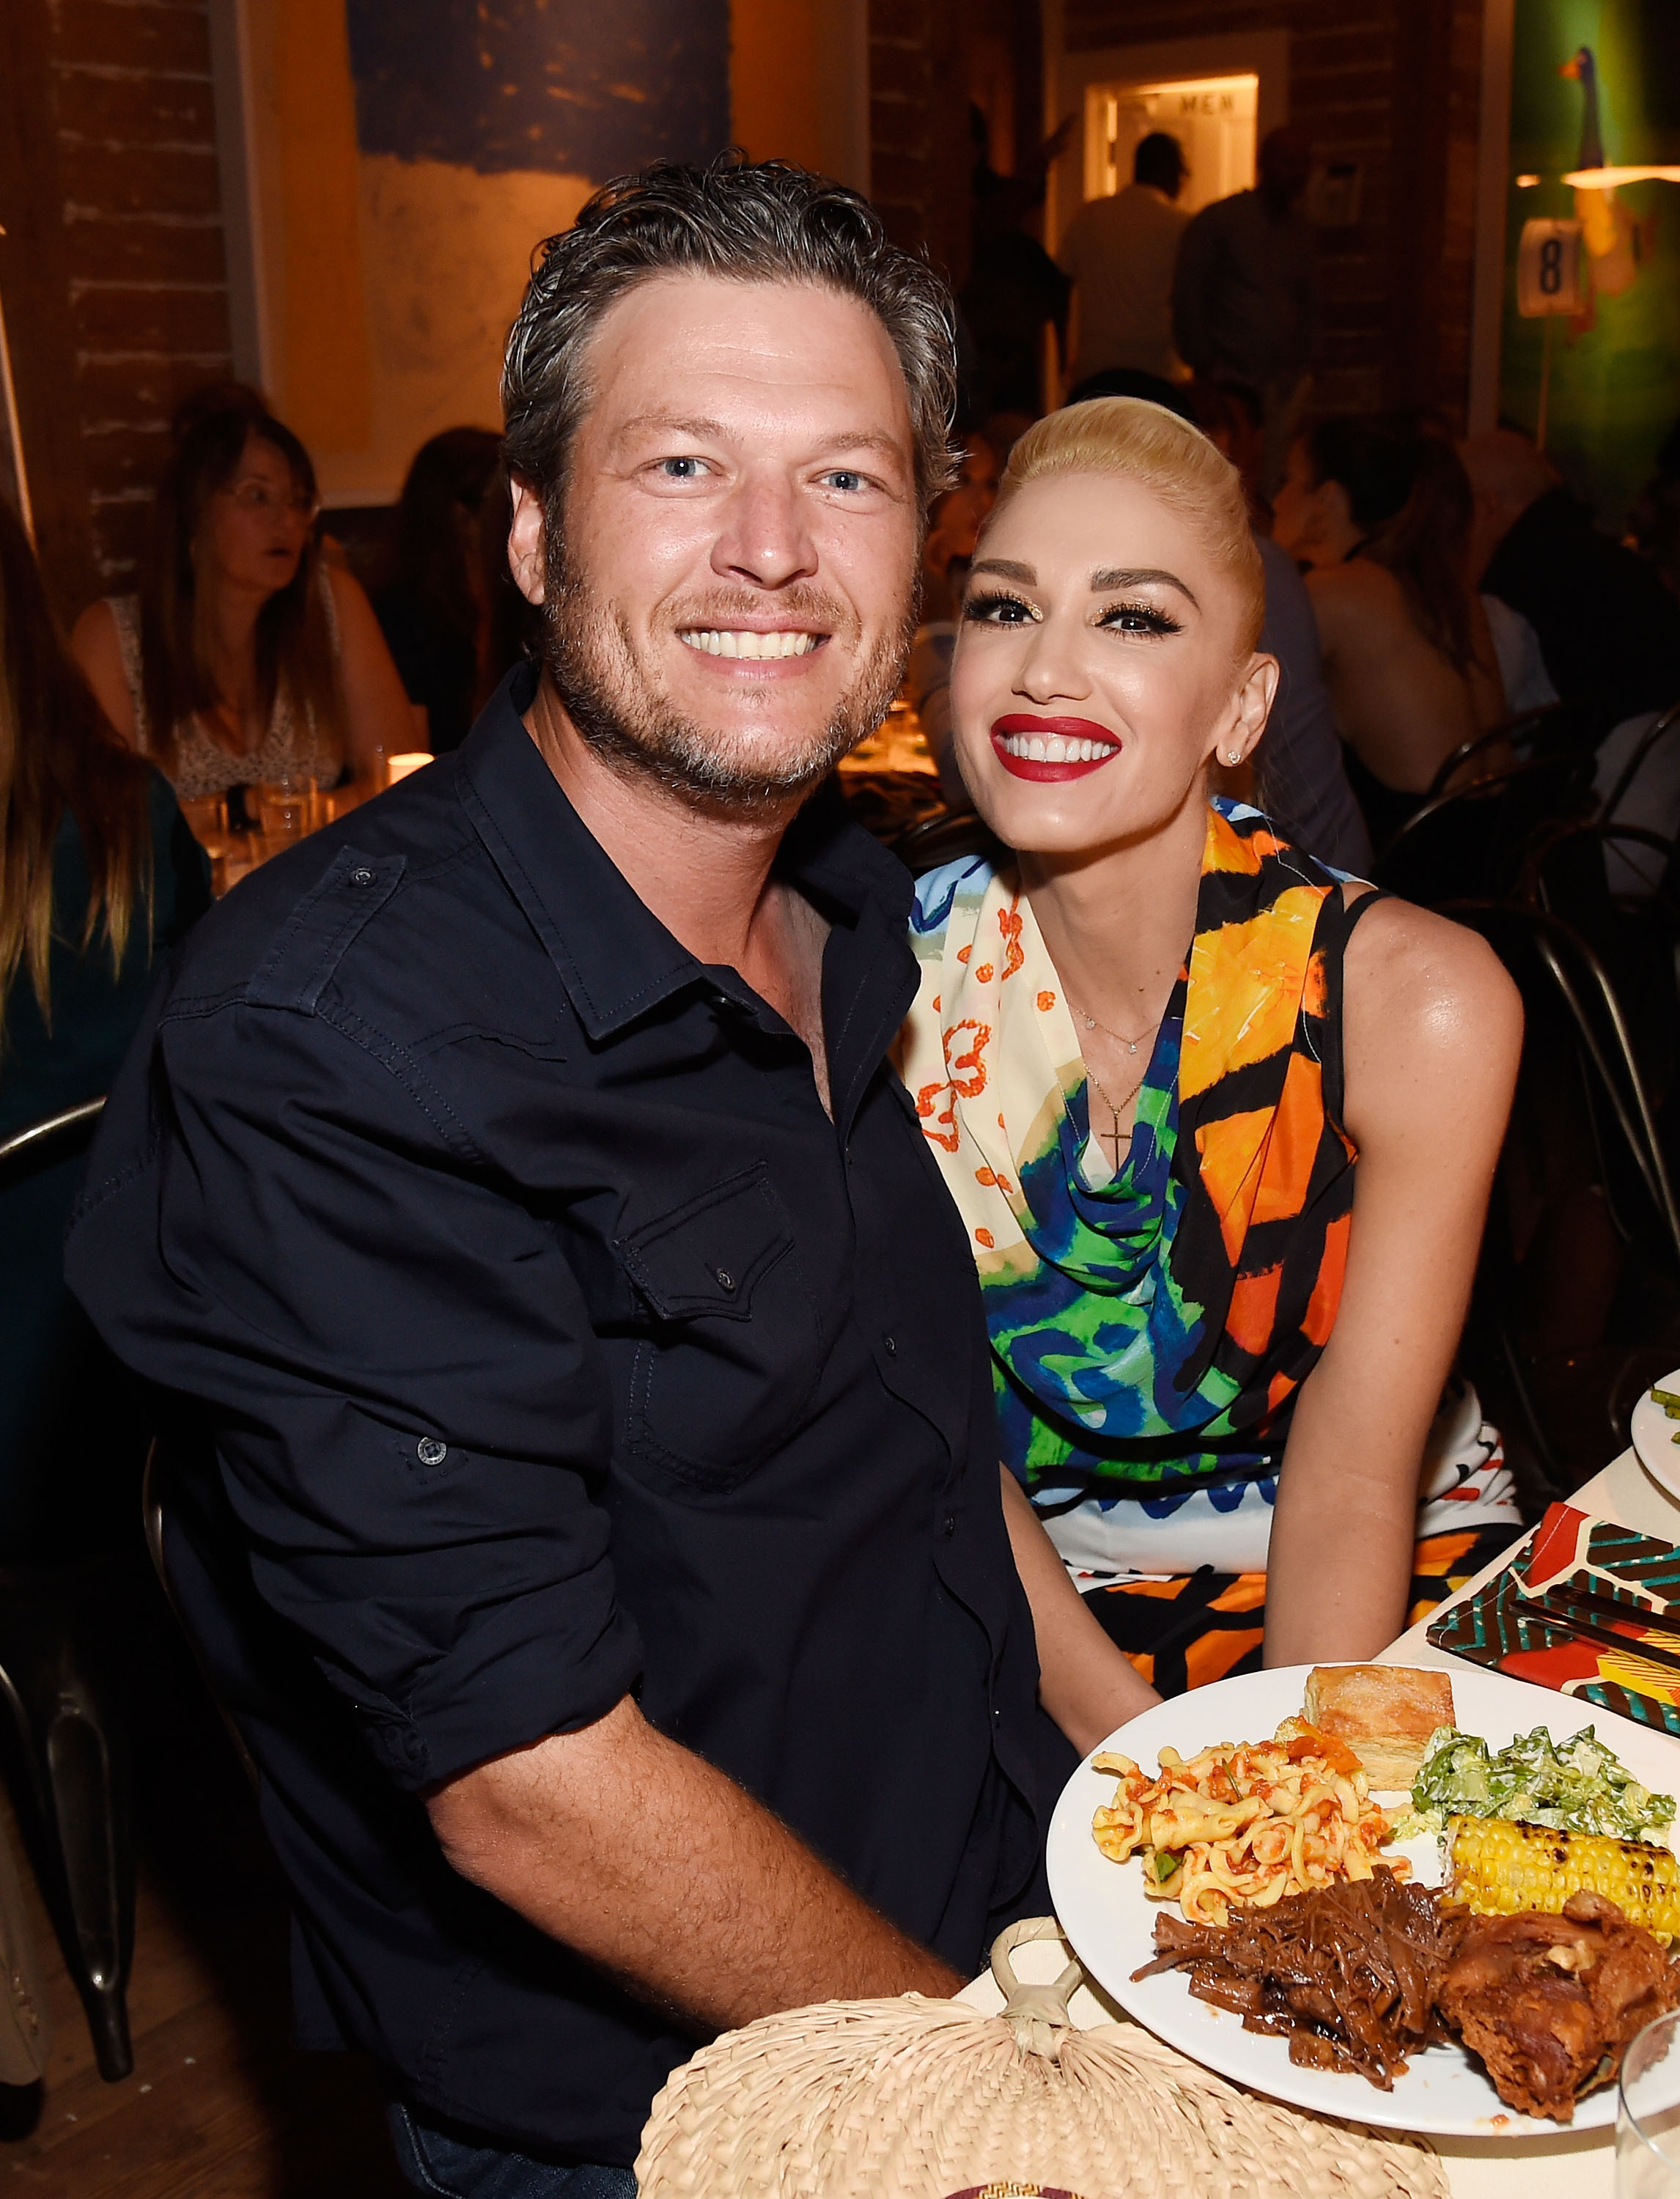 Blake and Gwen have been fueling rumors that they are having marital woes since they're spending a lot of time apart